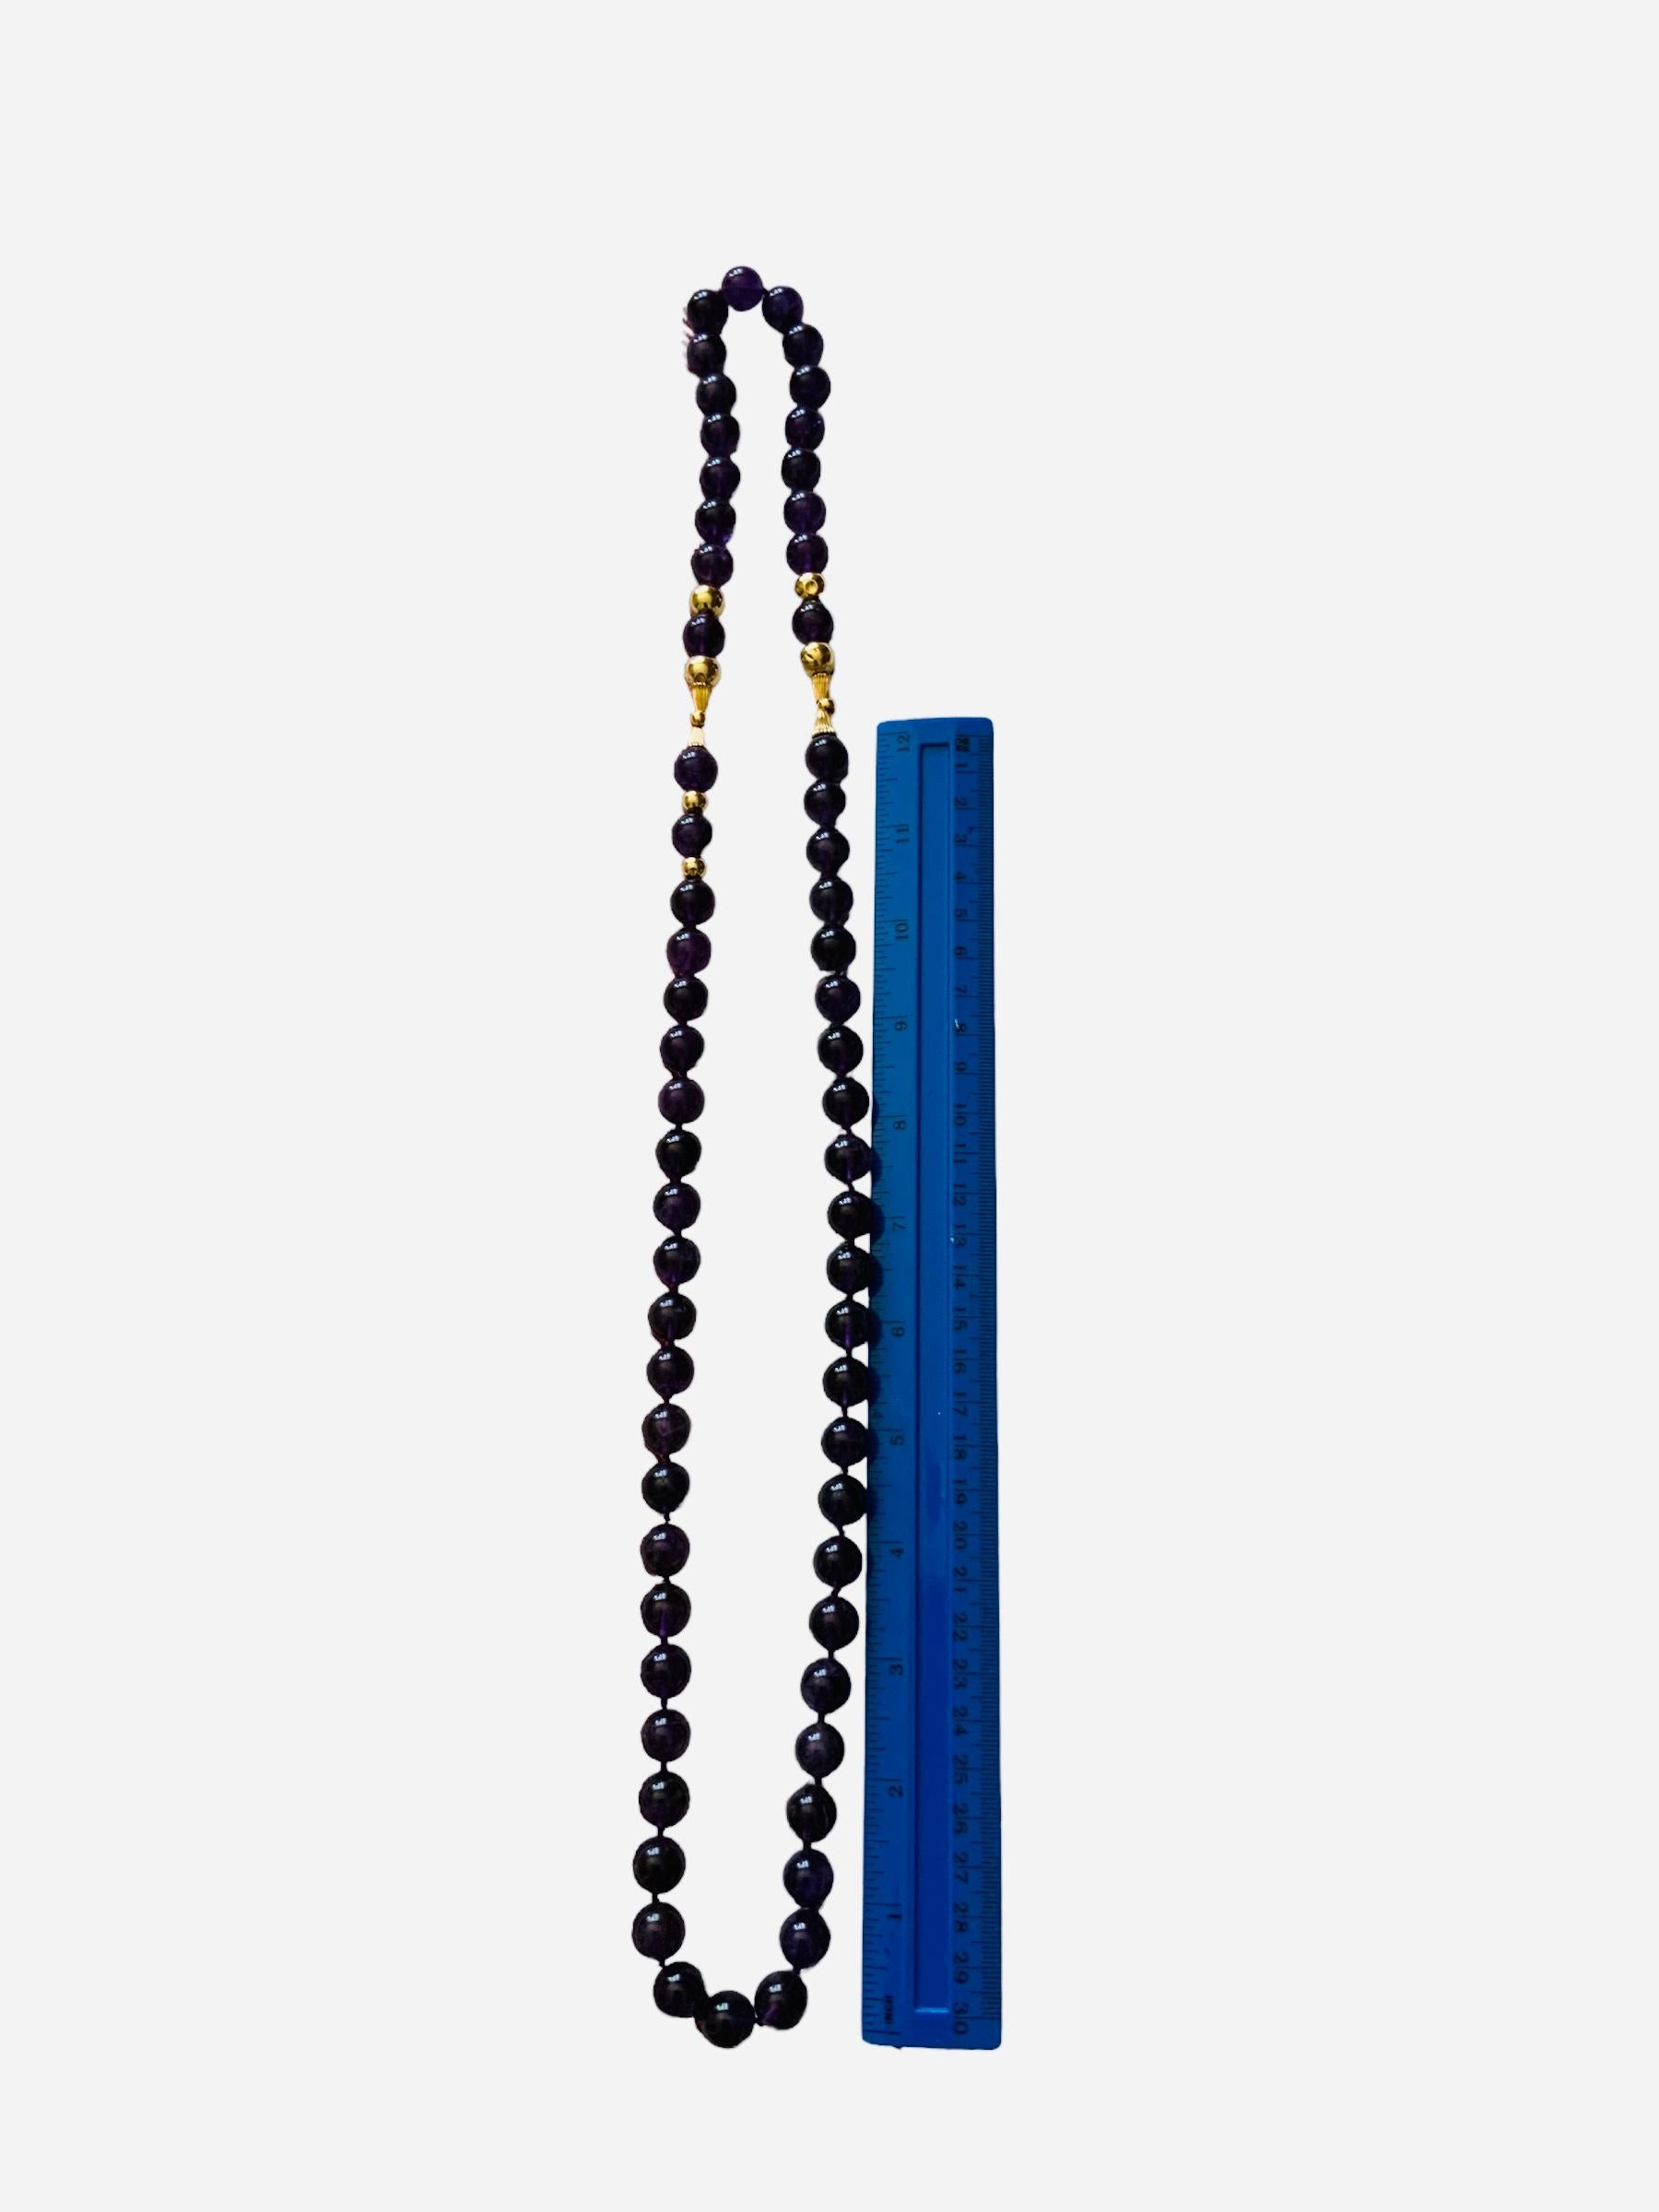 This is an Amethyst and gold beads long necklace. It depicts a necklace made of round large amethyst spheres fasten on a string. It is adorned with large gold beads and ribbed small “trumpets” that are also placed in the same way. Amethyst beads